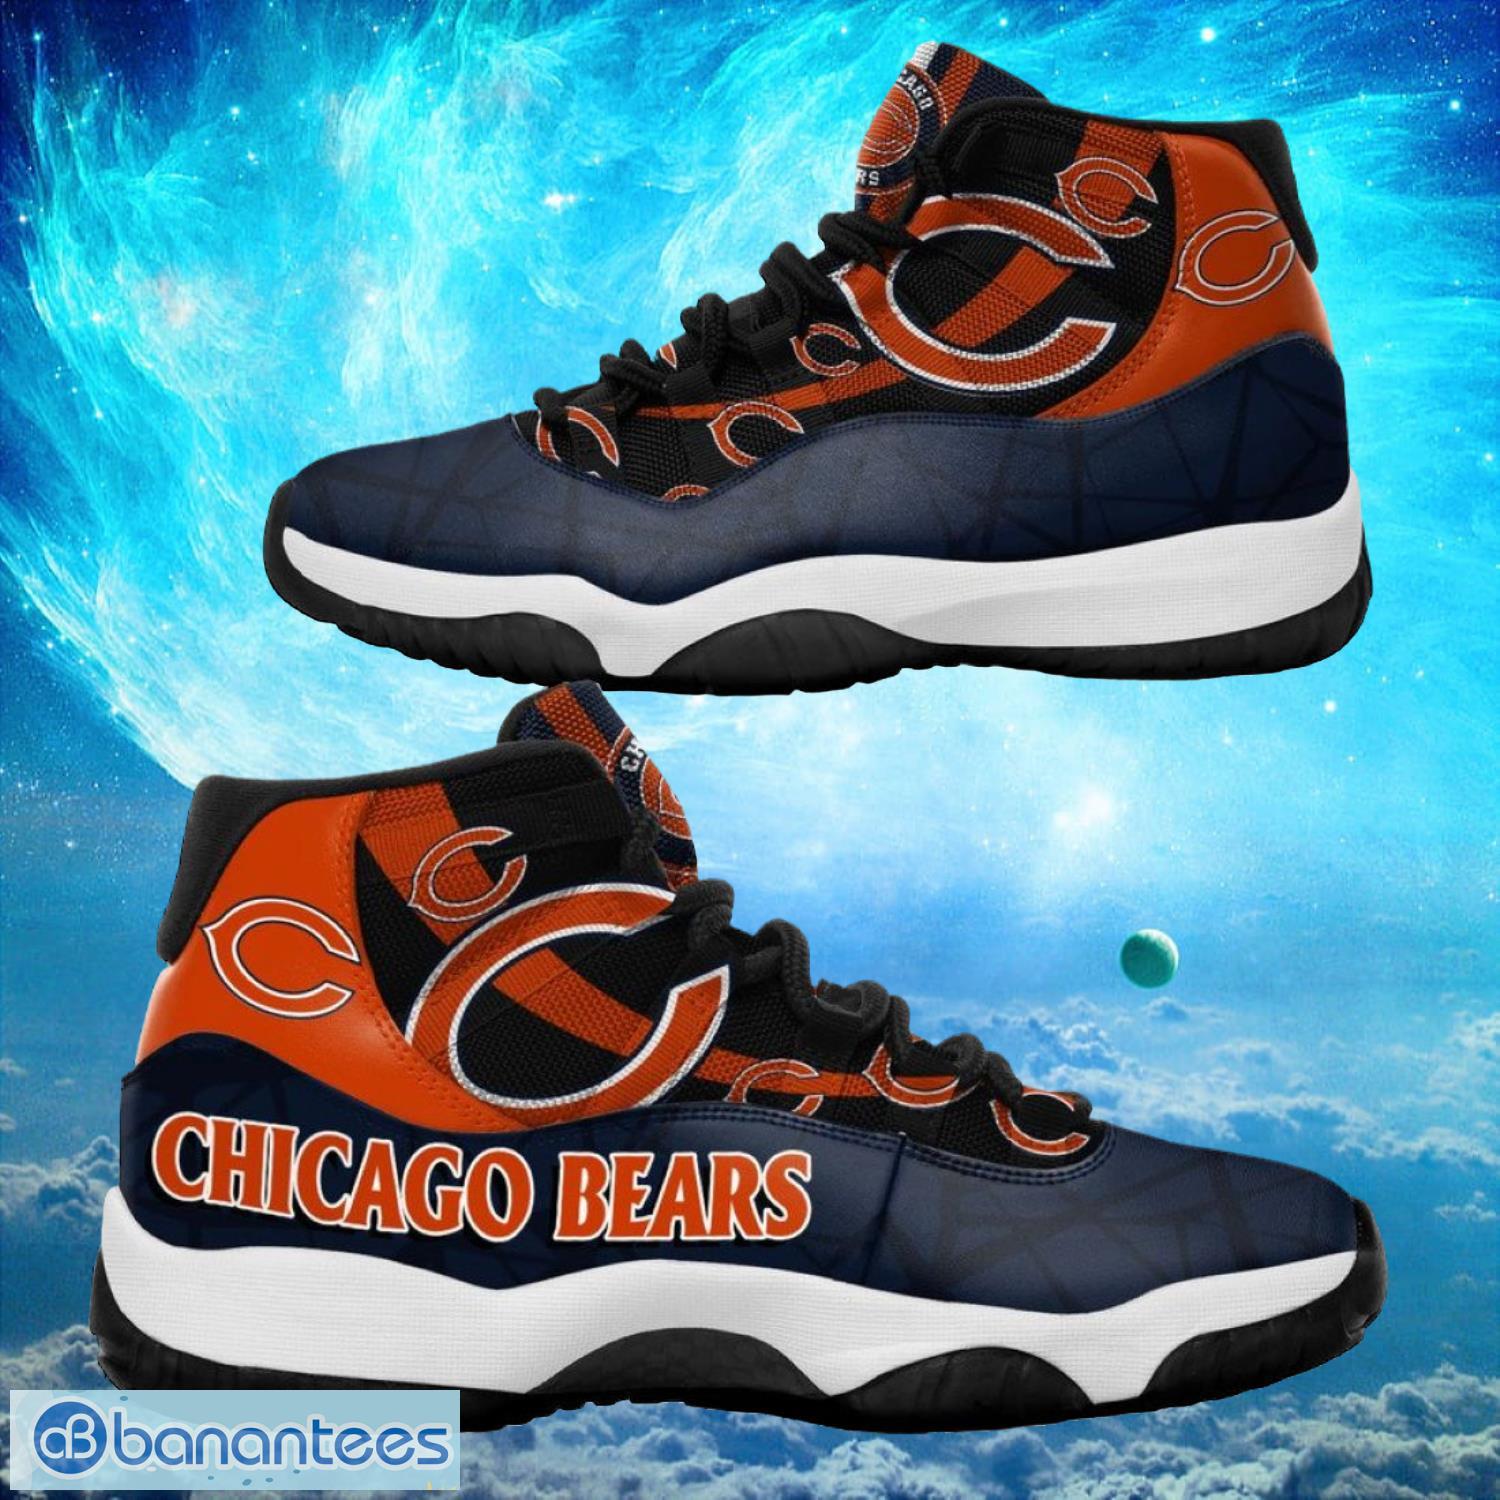 Chicago Bears NFL Air Jordan 11 Sneakers Shoes Gift For Fans Product Photo 1